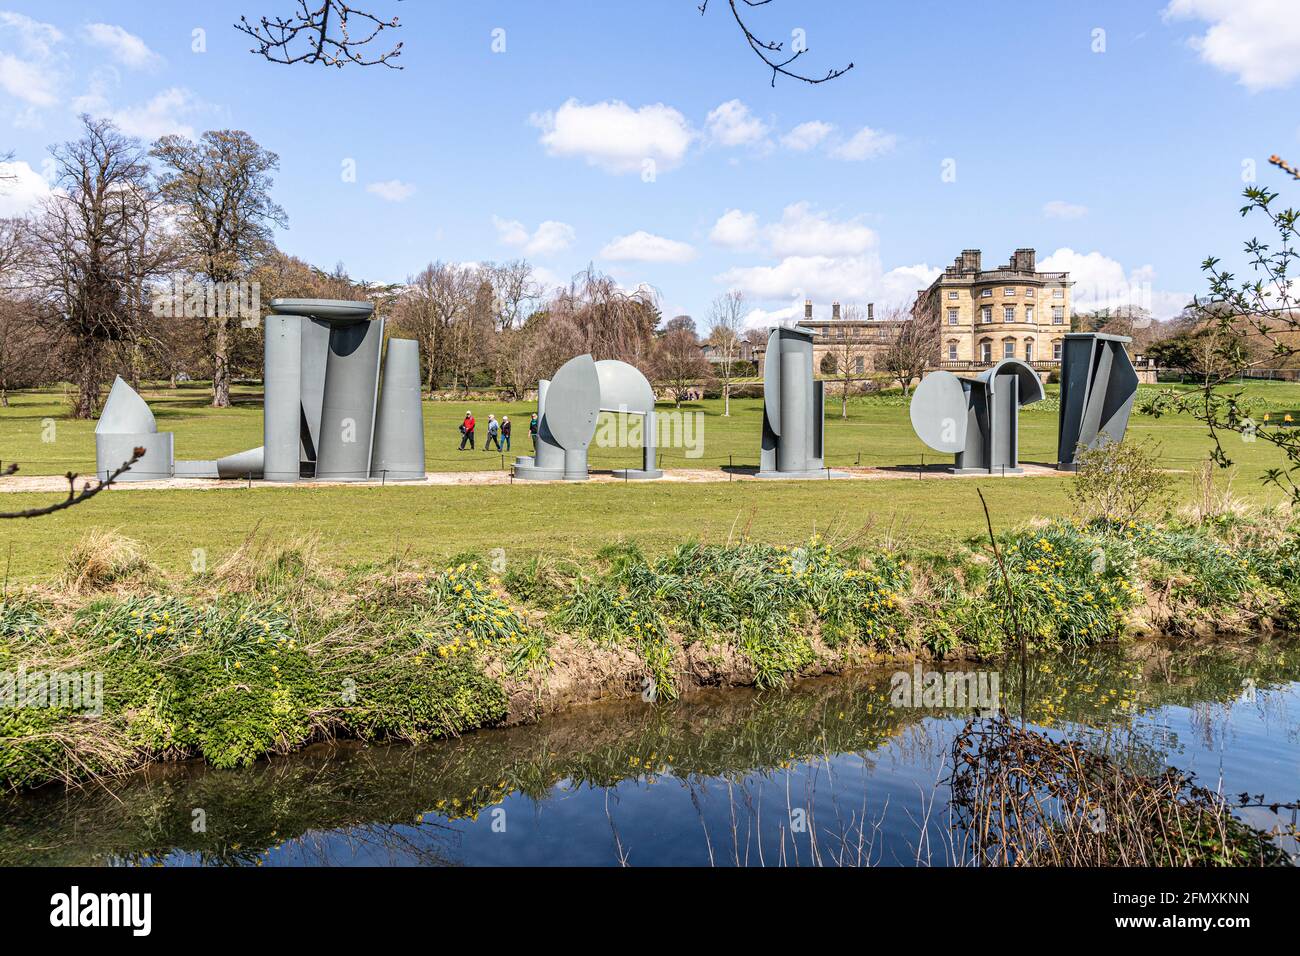 An exhibit at the Yorkshire Sculpture Park YSP at Bretton Hall, Wakefield, West Yorkshire, England UK - Promenade 1996 by Anthony Caro Stock Photo